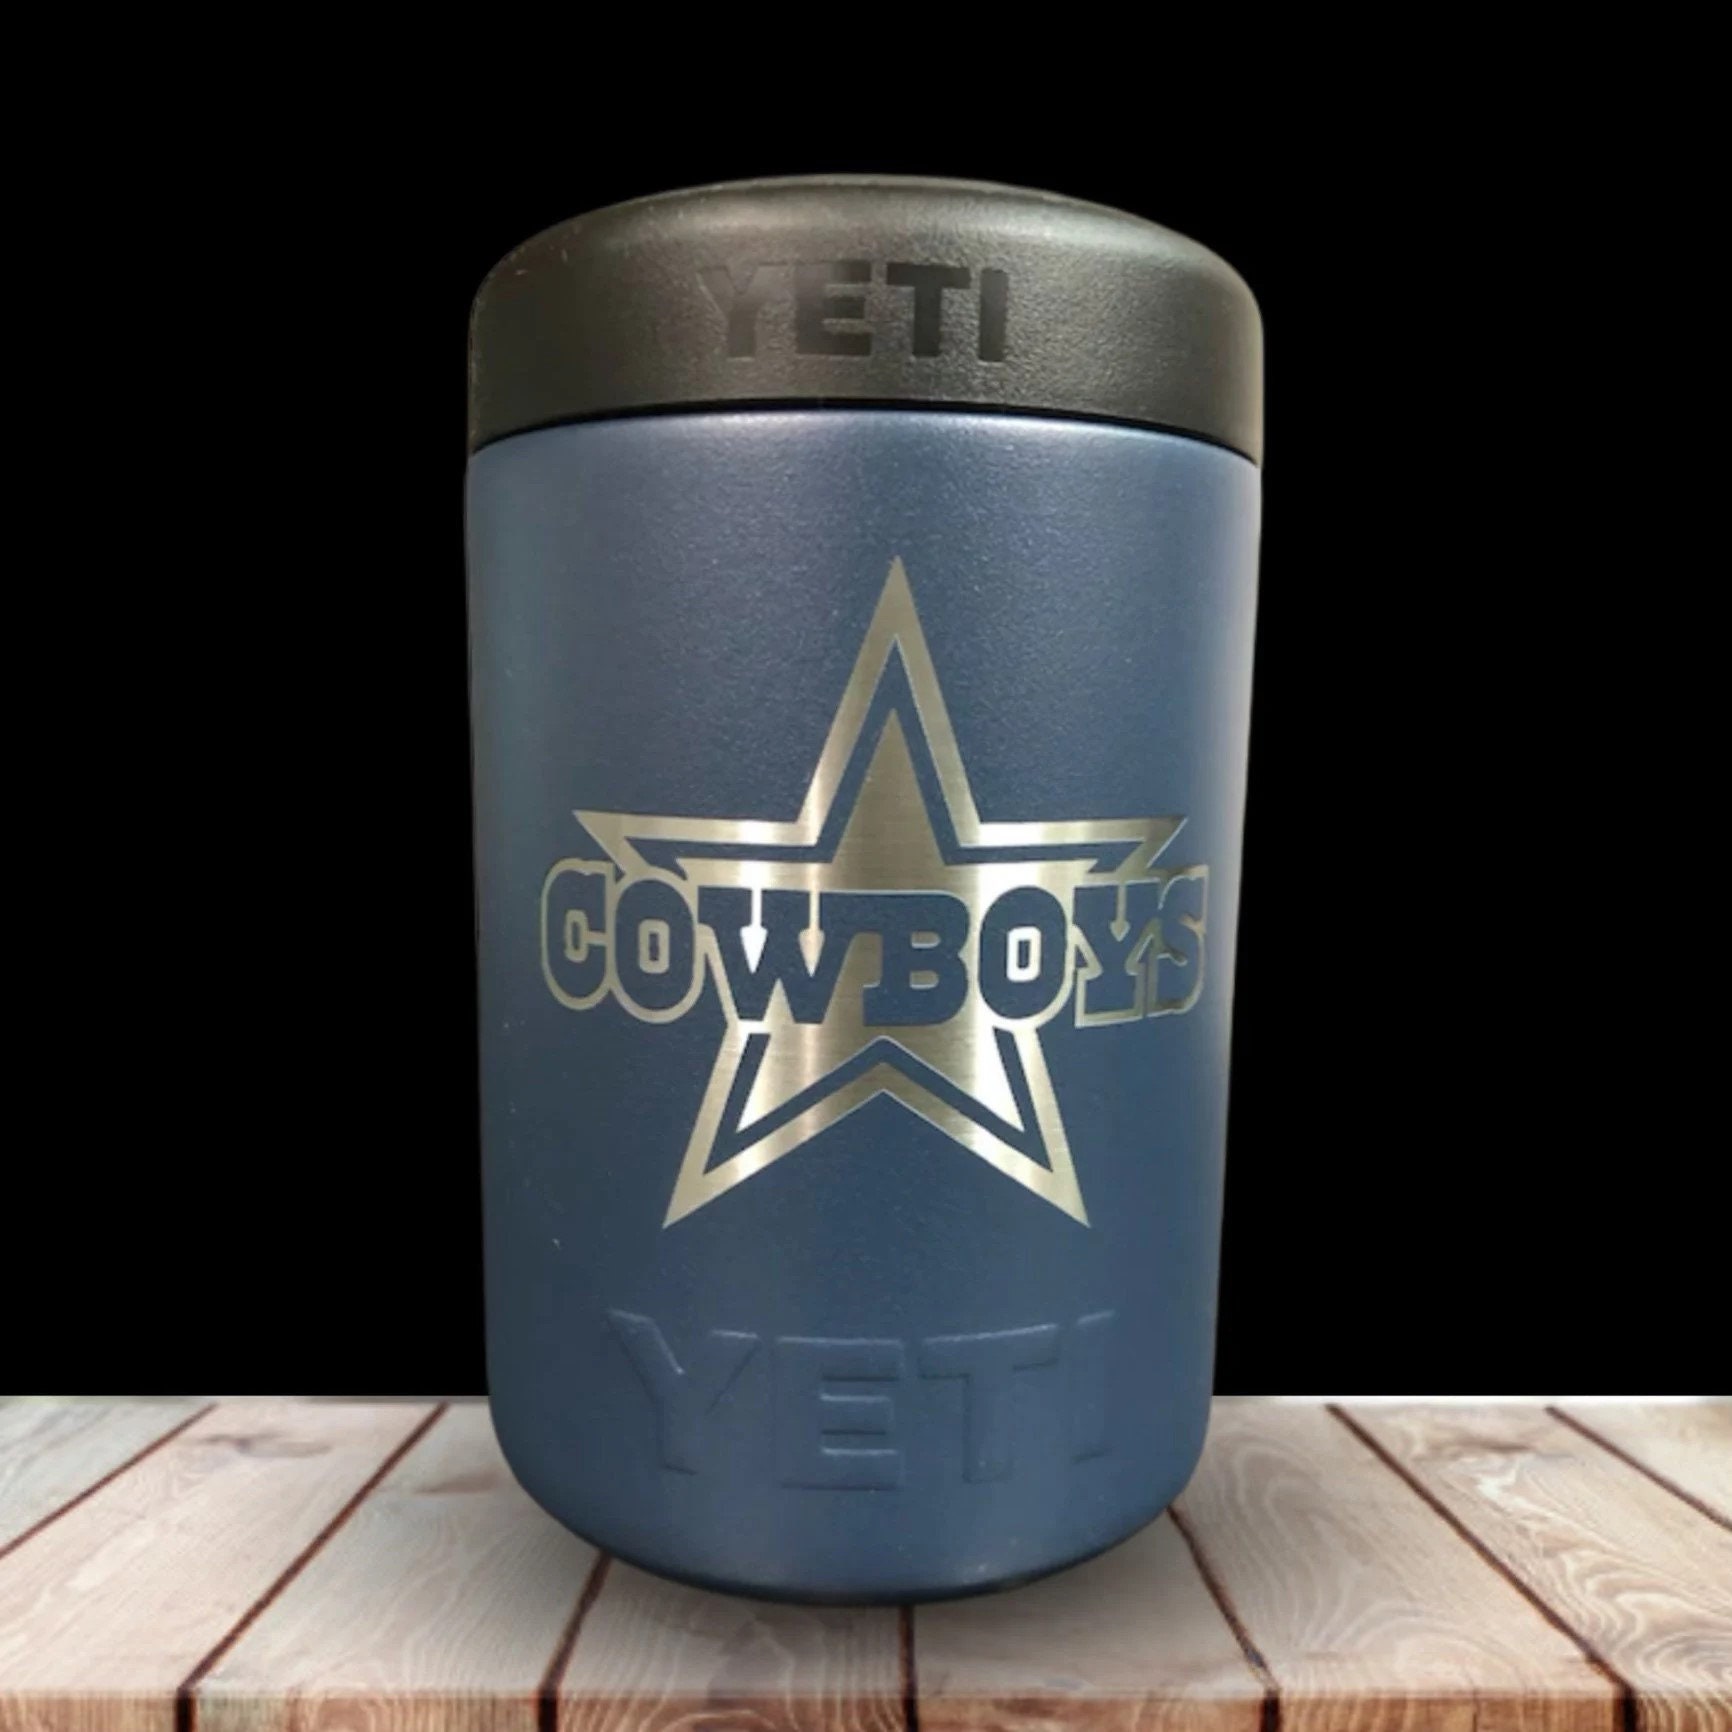 Dad Can Cooler Custom YETI® Colster Father's Day Gift 